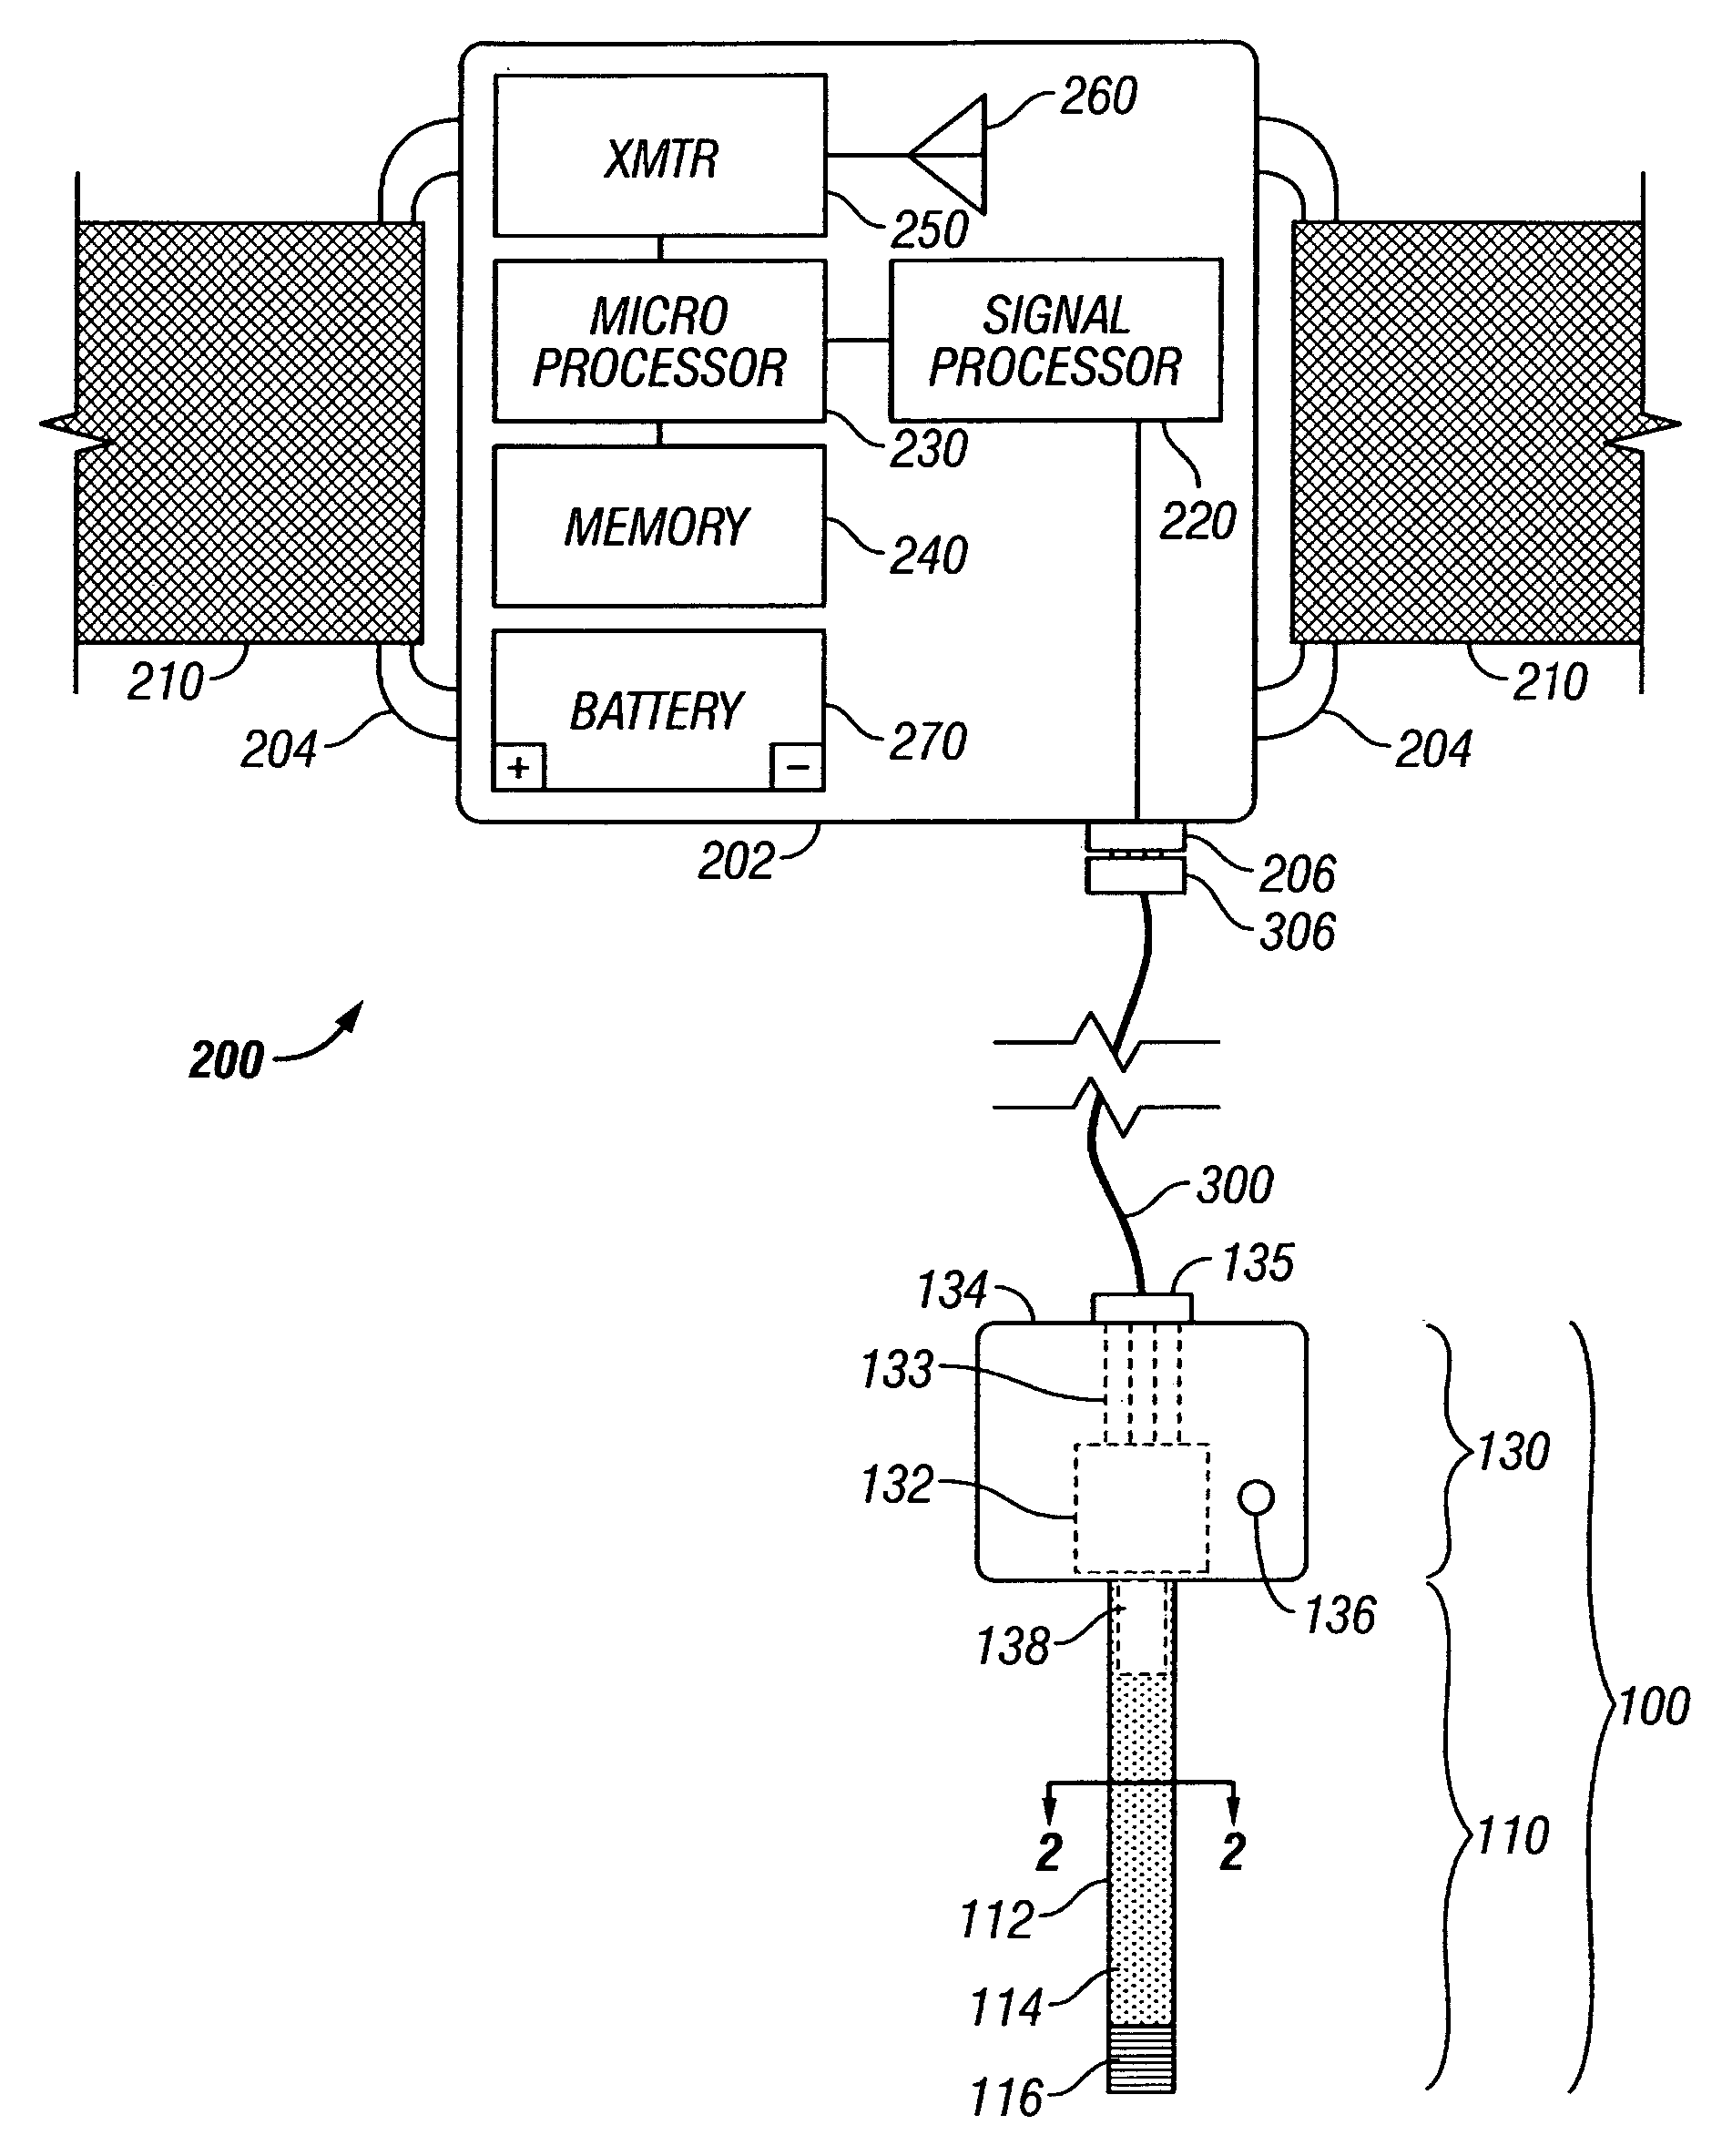 Vascular blood pressure monitoring system with transdermal catheter and telemetry capability